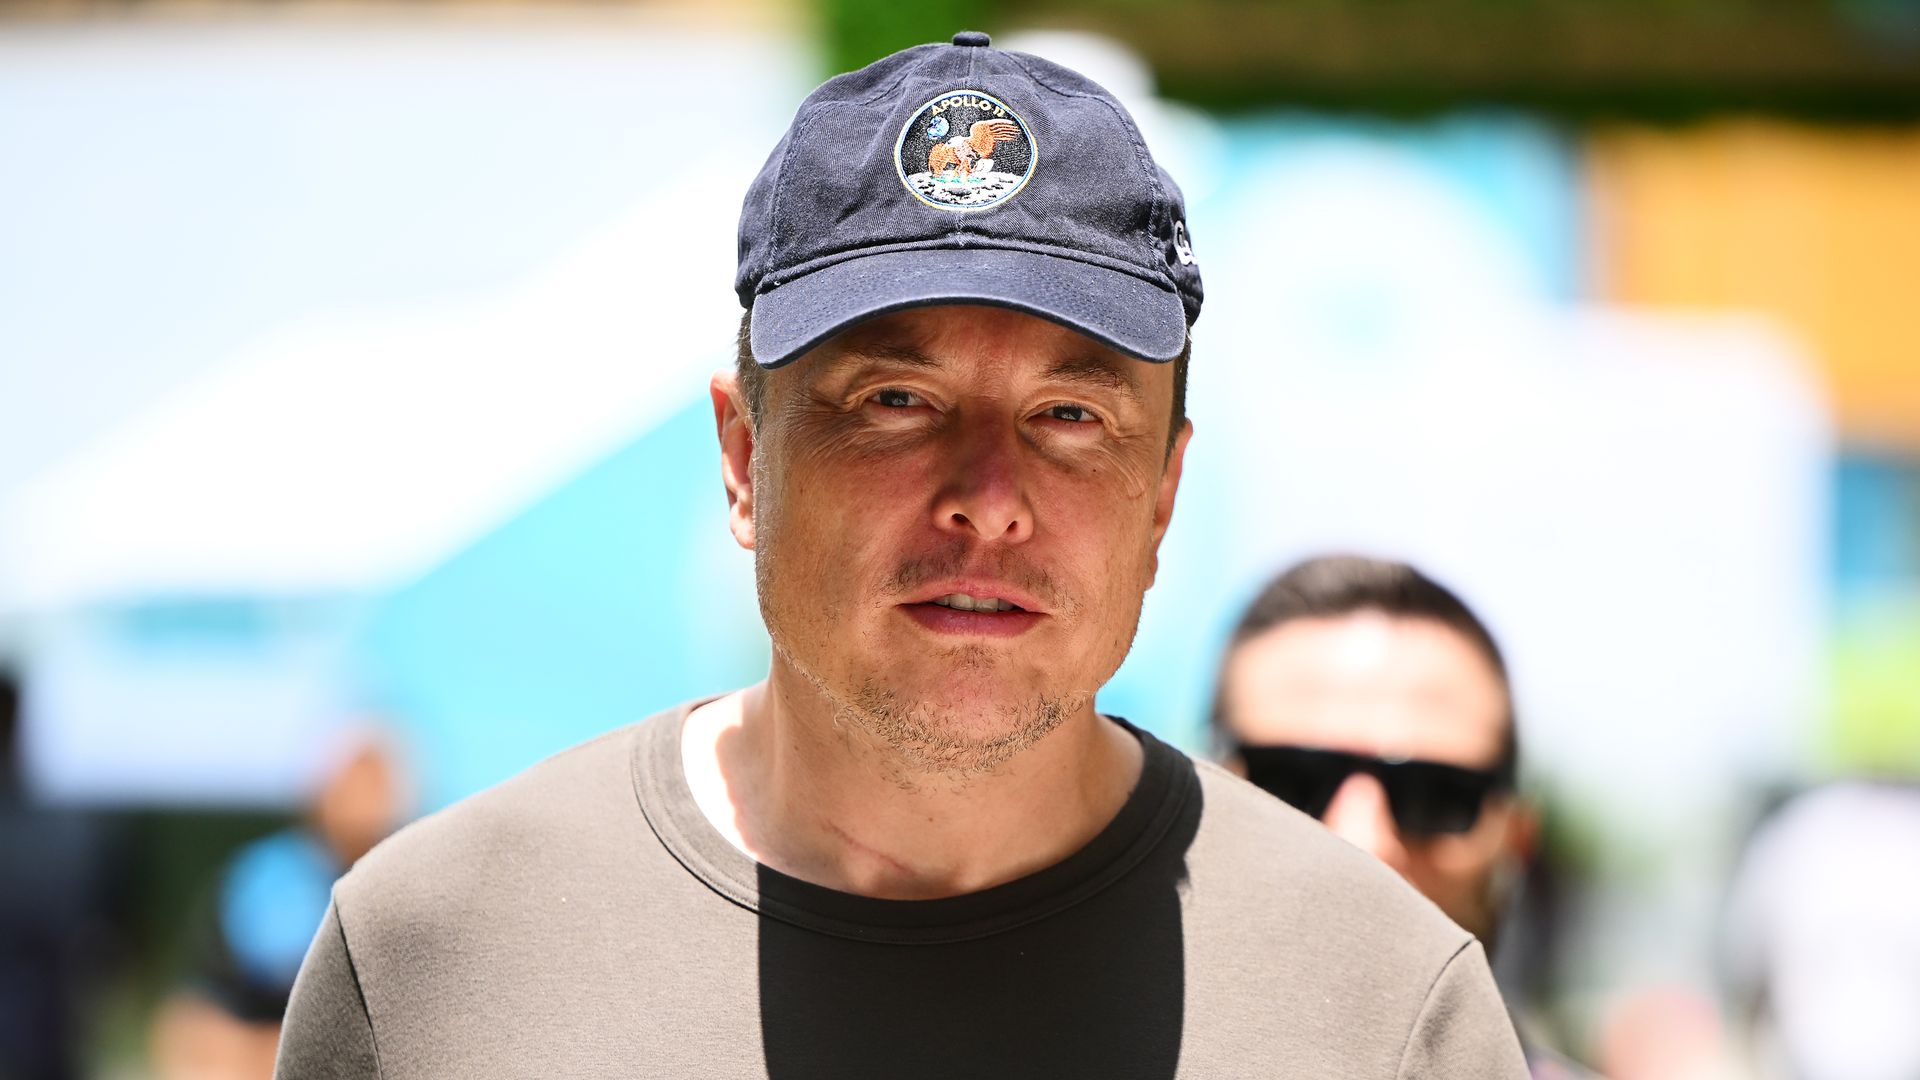  Elon Musk walks in the Paddock prior to final practice ahead of the F1 Grand Prix of Miami at Miami International Autodrome on May 06, 2023 in Miami, Florida.